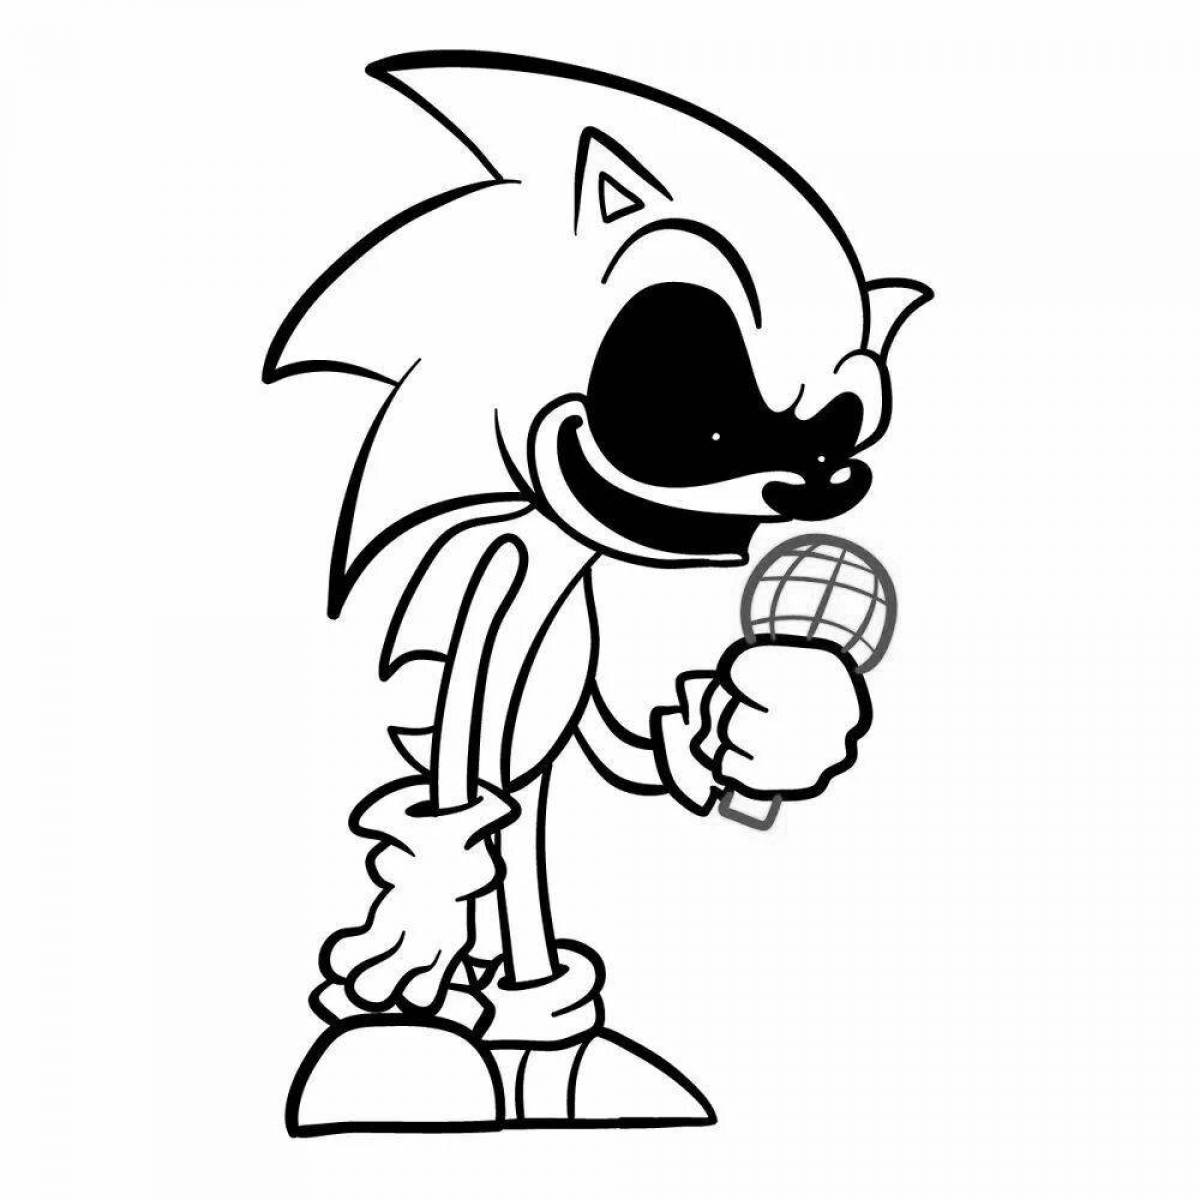 Tempting sonic exe fnf coloring